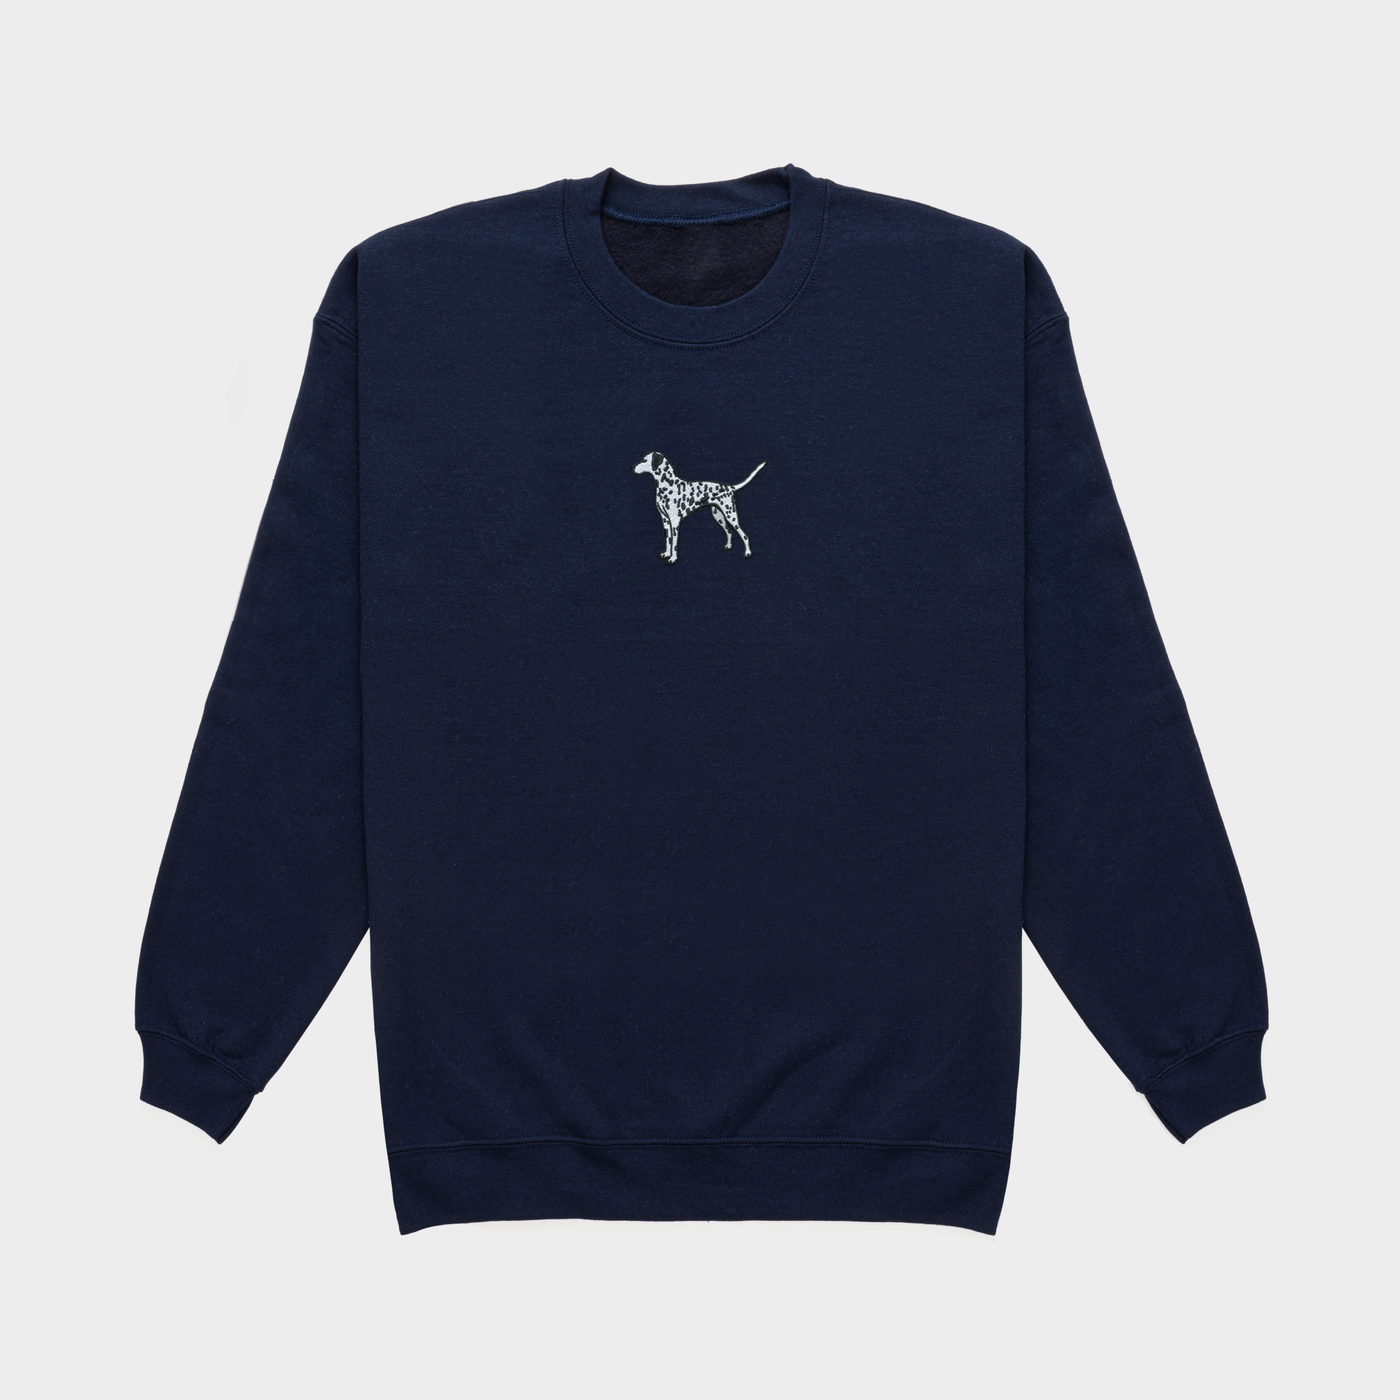 Bobby's Planet Women's Embroidered Dalmatian Sweatshirt from Paws Dog Cat Animals Collection in Navy Color#color_navy